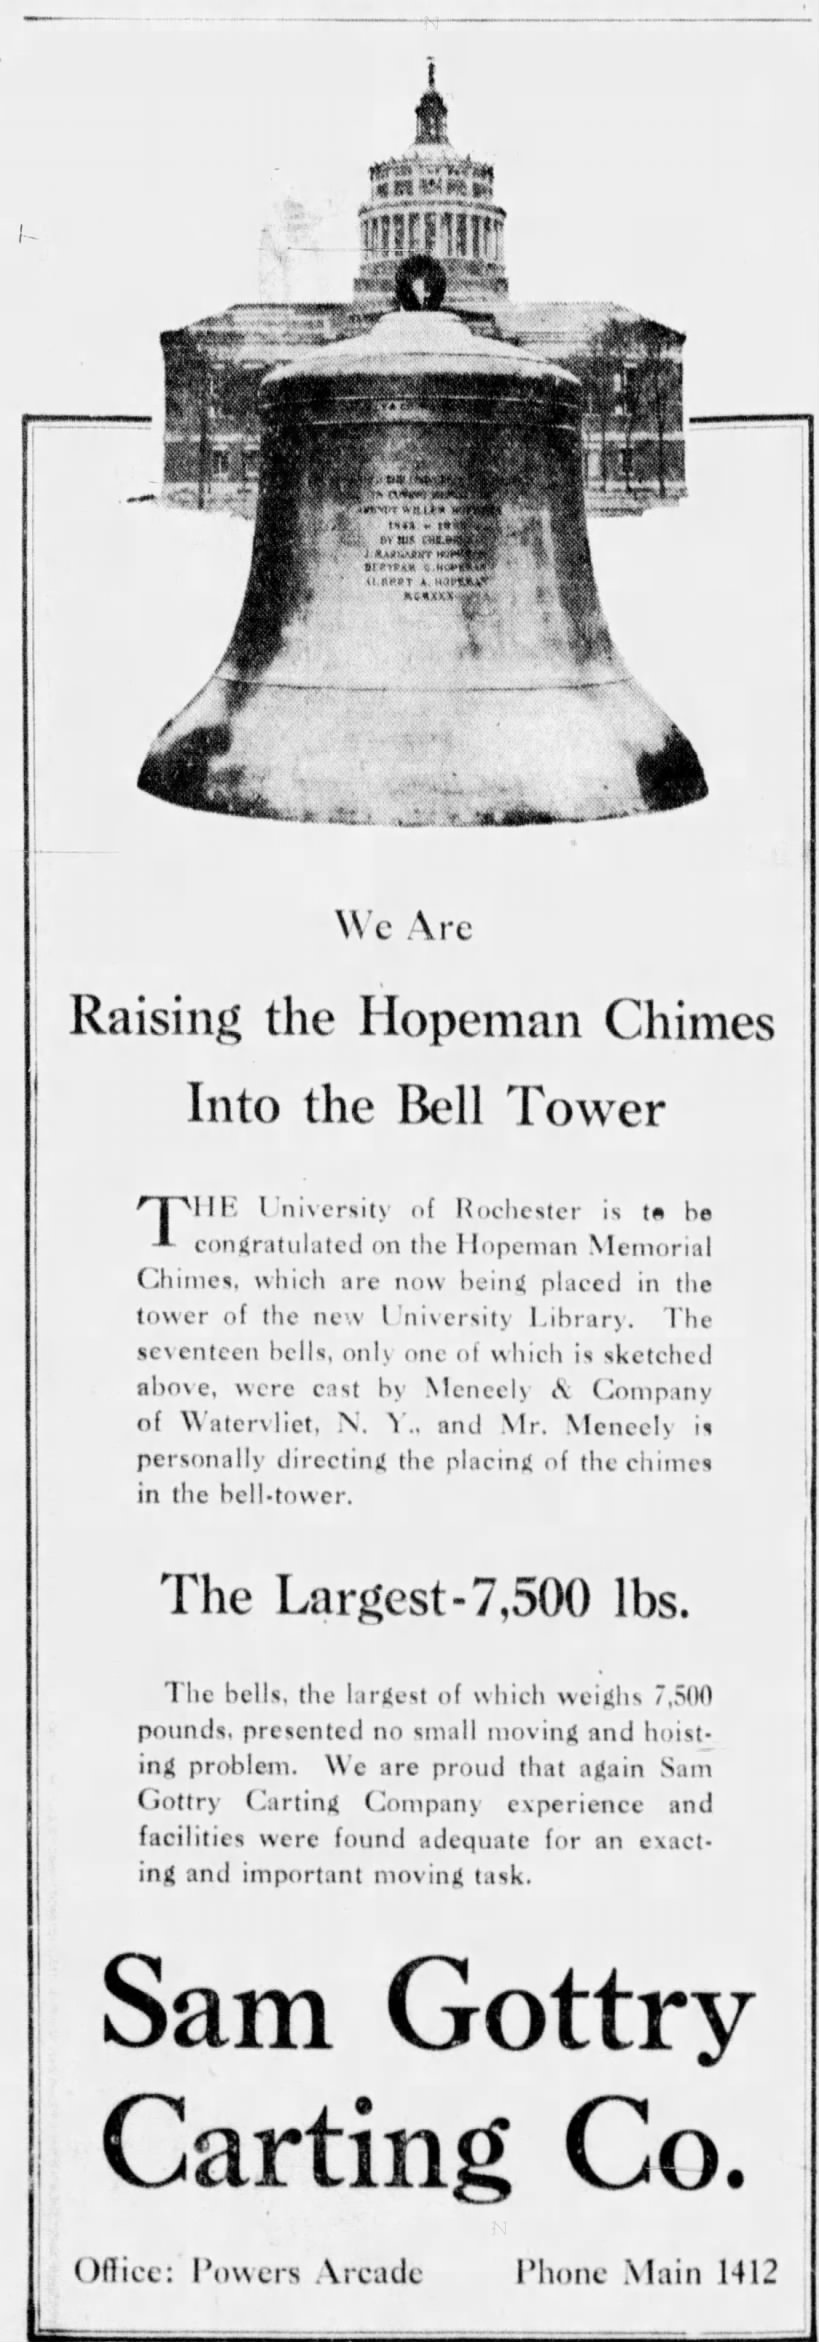 We are Raising the Hopeman Chimes into the Bell Tower